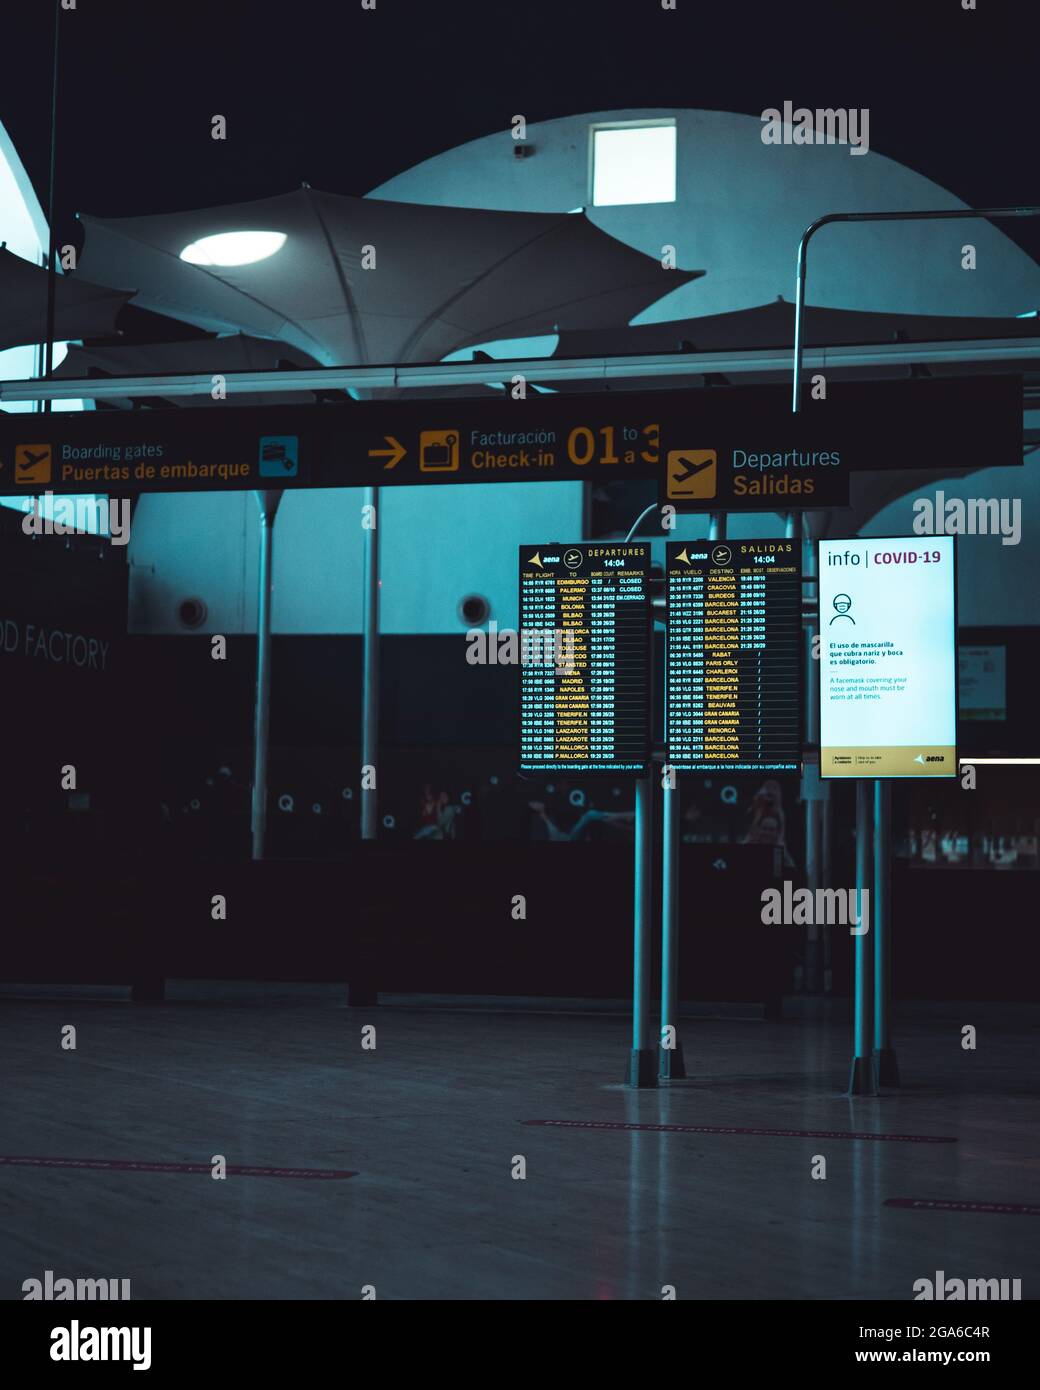 Travel, Business, Advertise - Screens showing information about the arrivals and departures of flights at an airport and a poster about covid measures Stock Photo